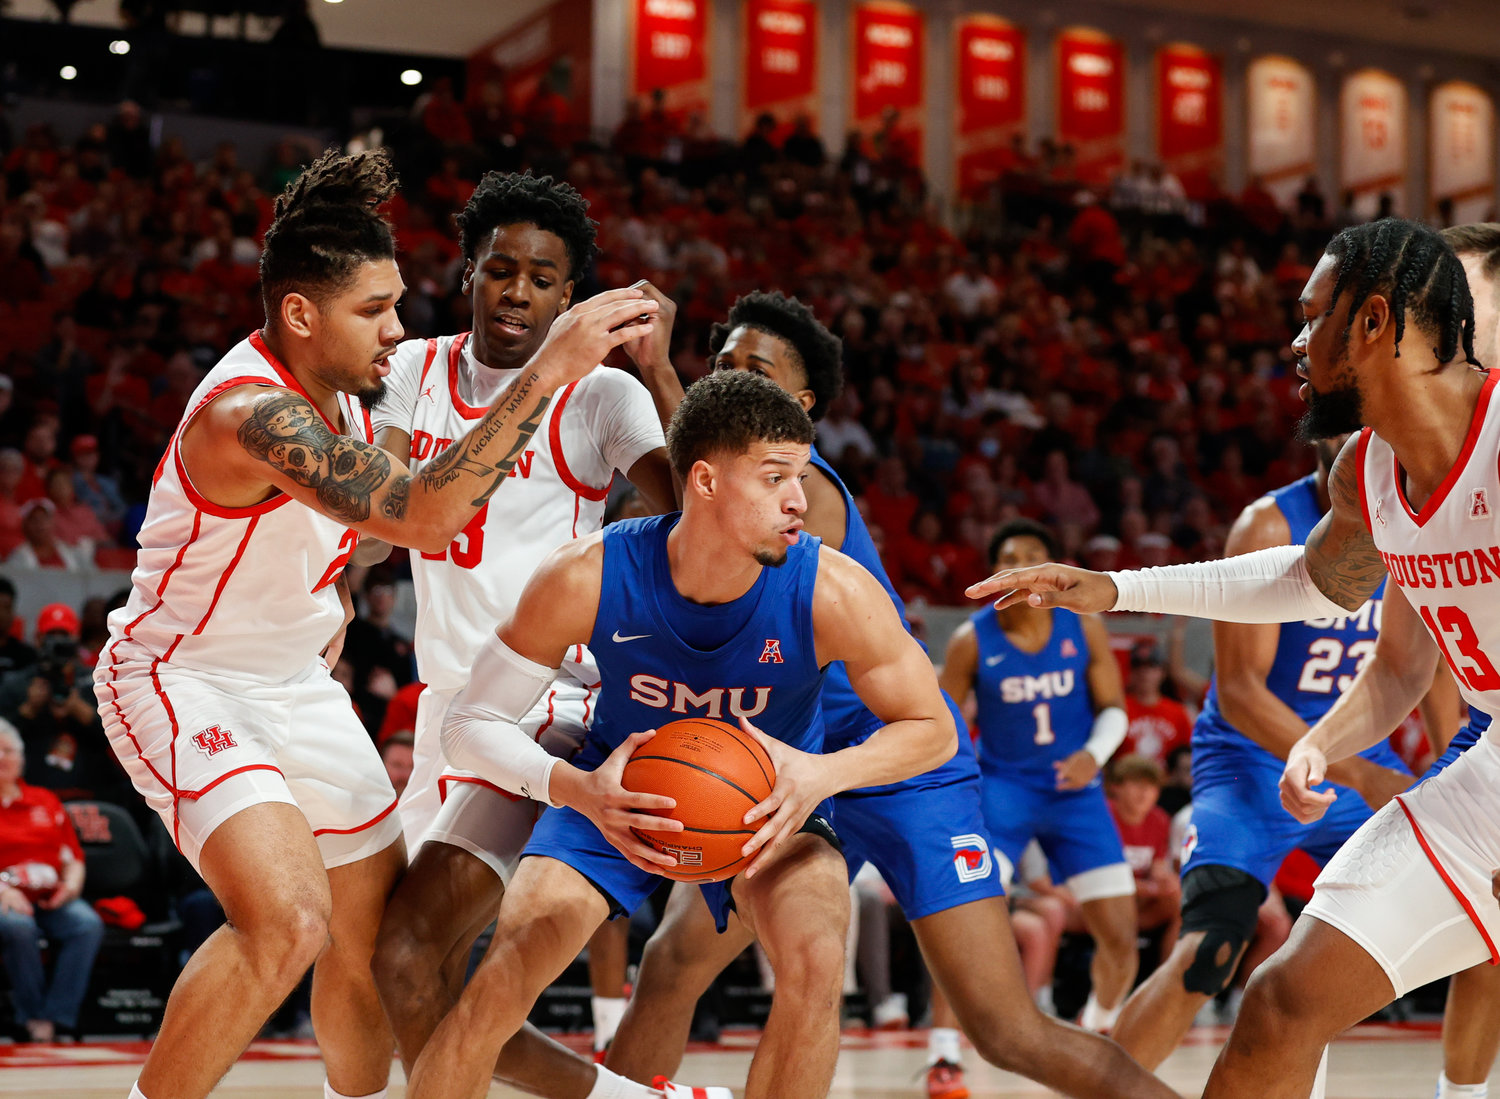 SMU forward Samuell Williamson (11) grabs a rebound during an NCAA men’s basketball game between the Houston Cougars and the Southern Methodist Mustangs on Jan. 5, 2023 in Houston. Houston won, 87-53,